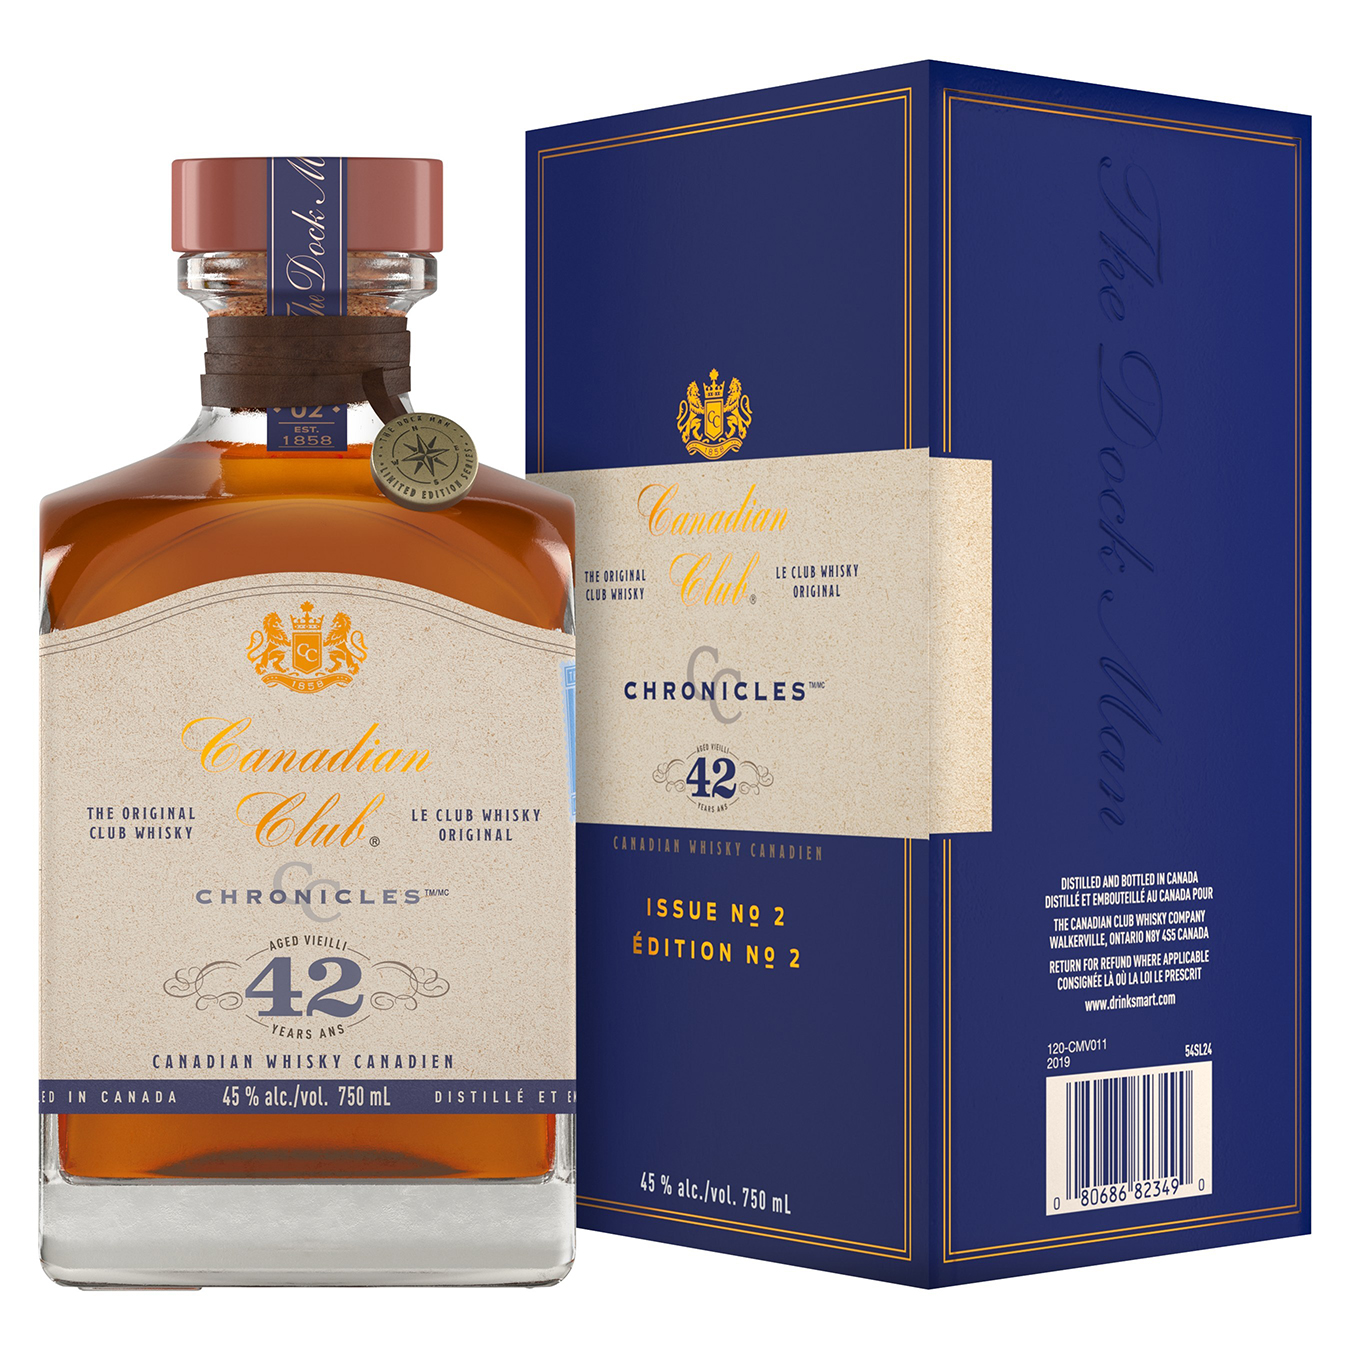 Canadian Club 42 Year Old whisky.